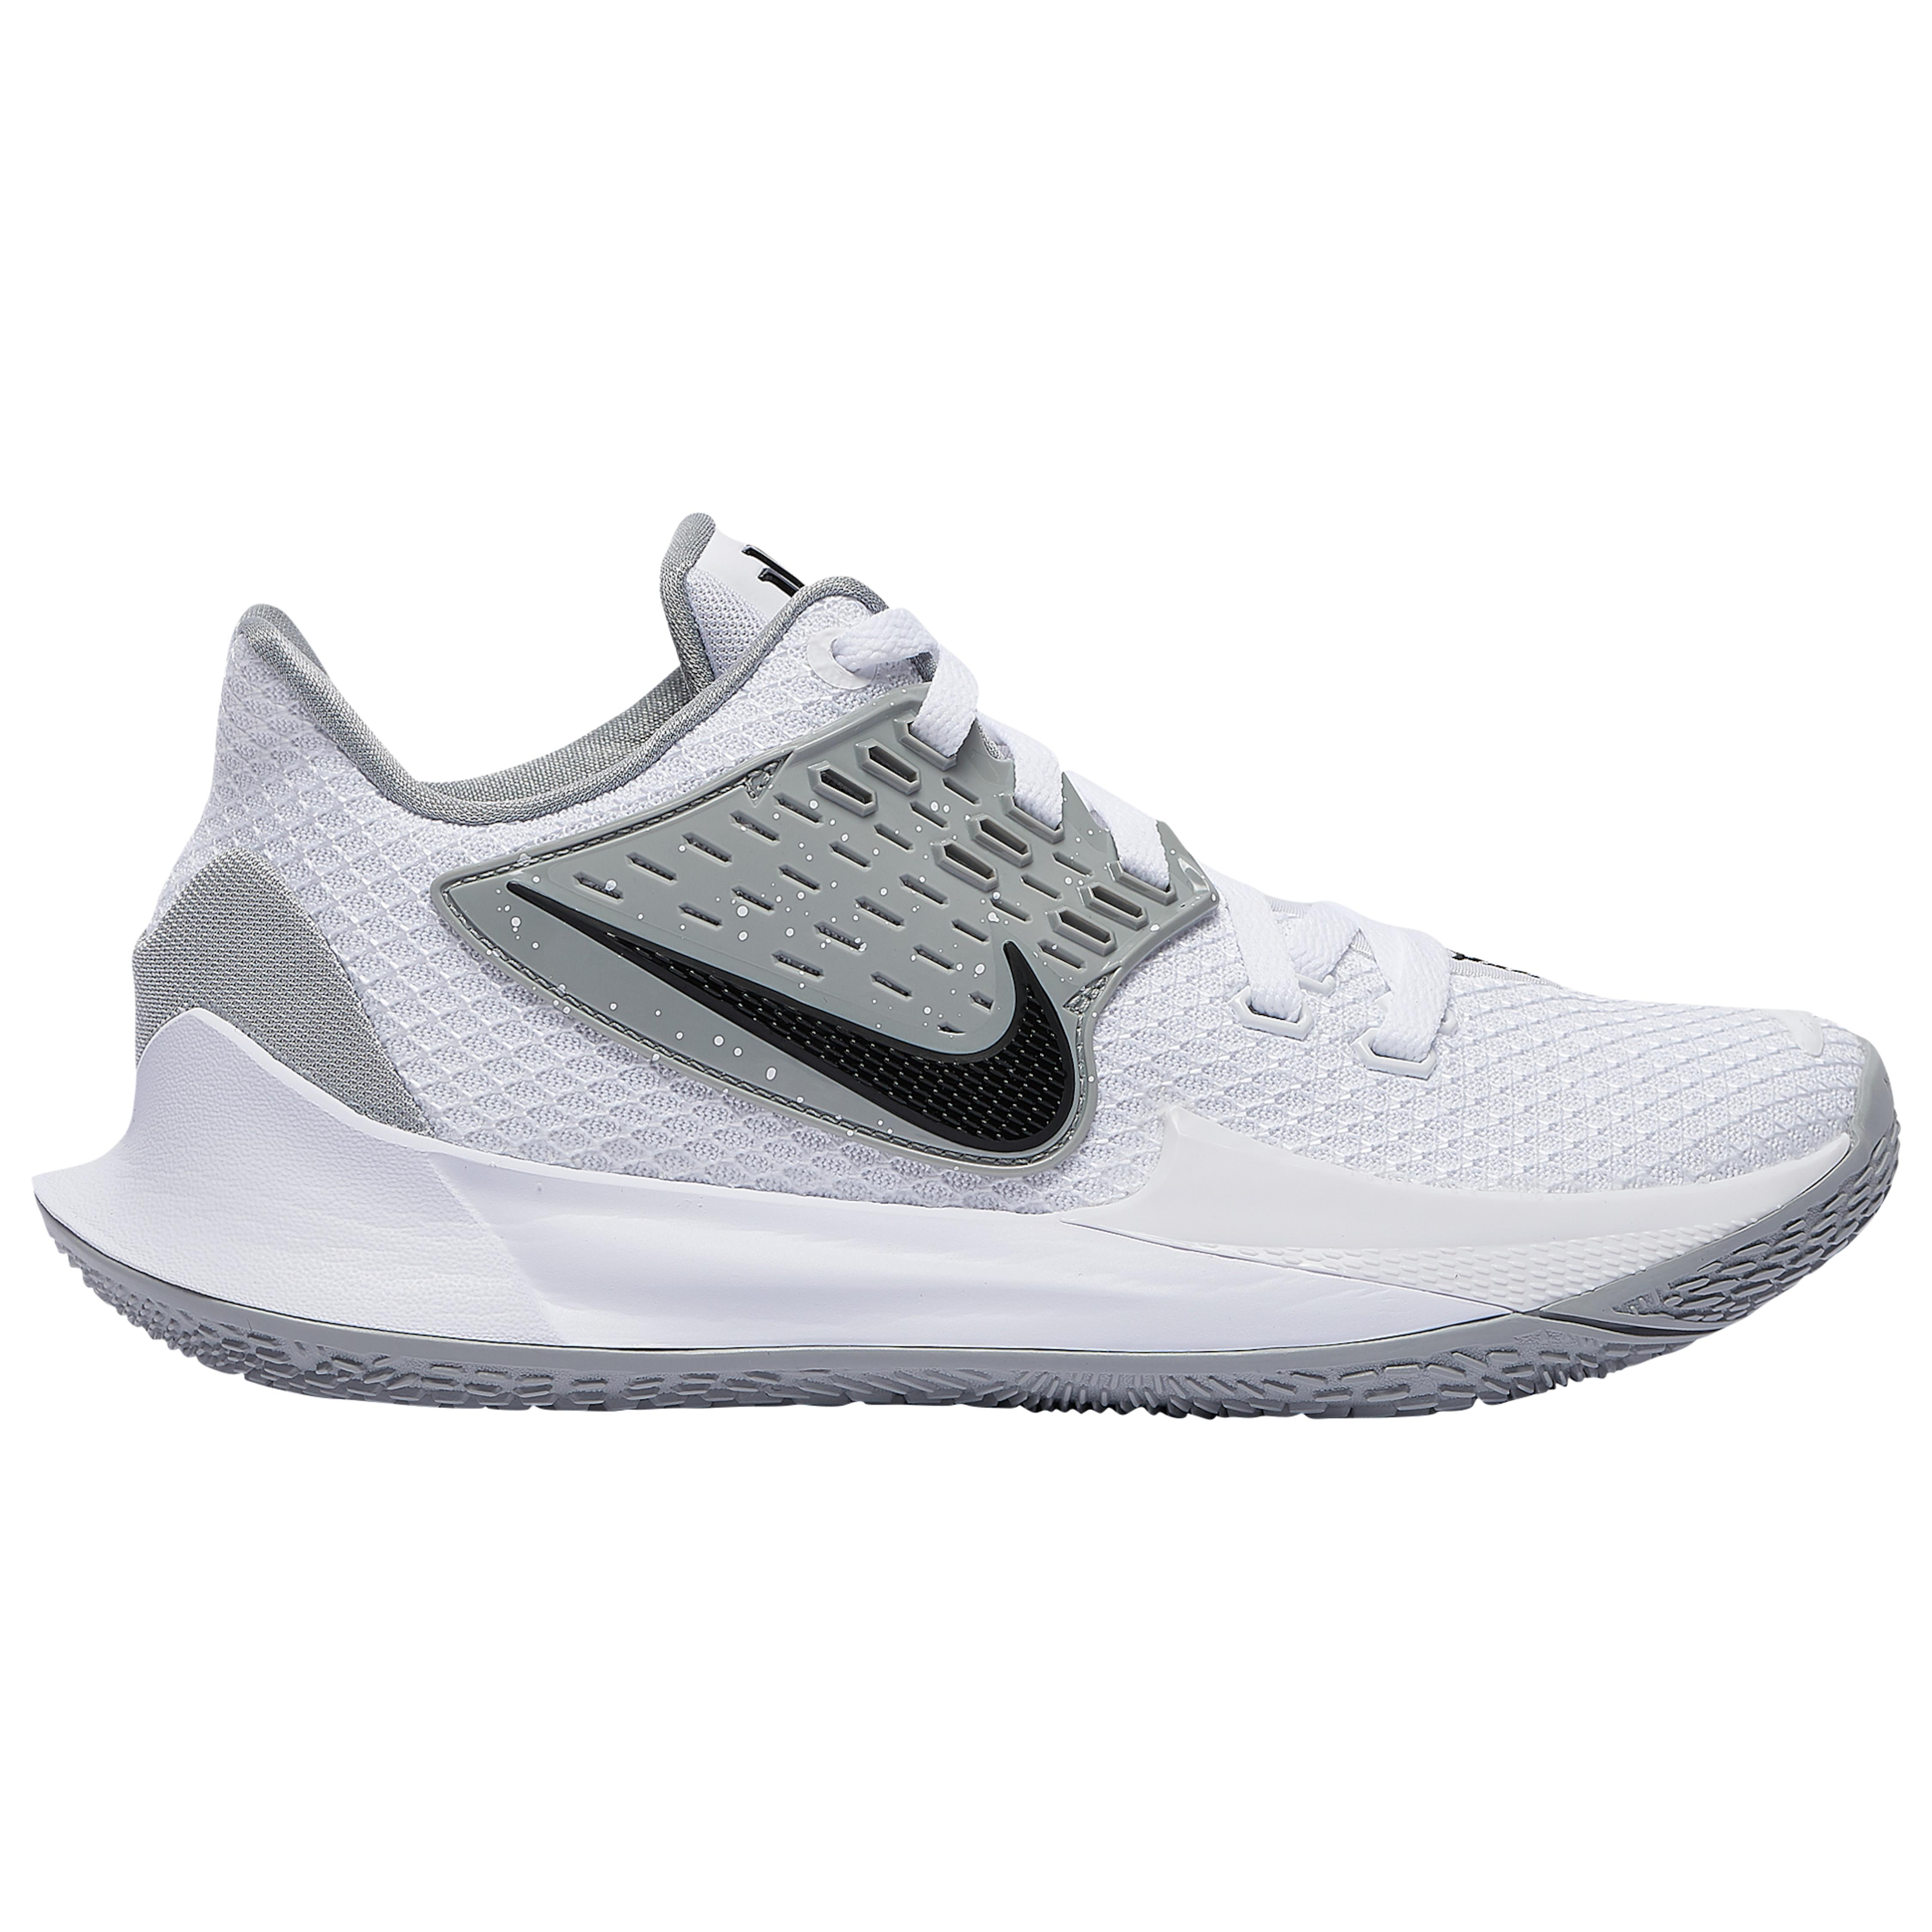 Nike Kyrie Low 2 in White/Black Silver 